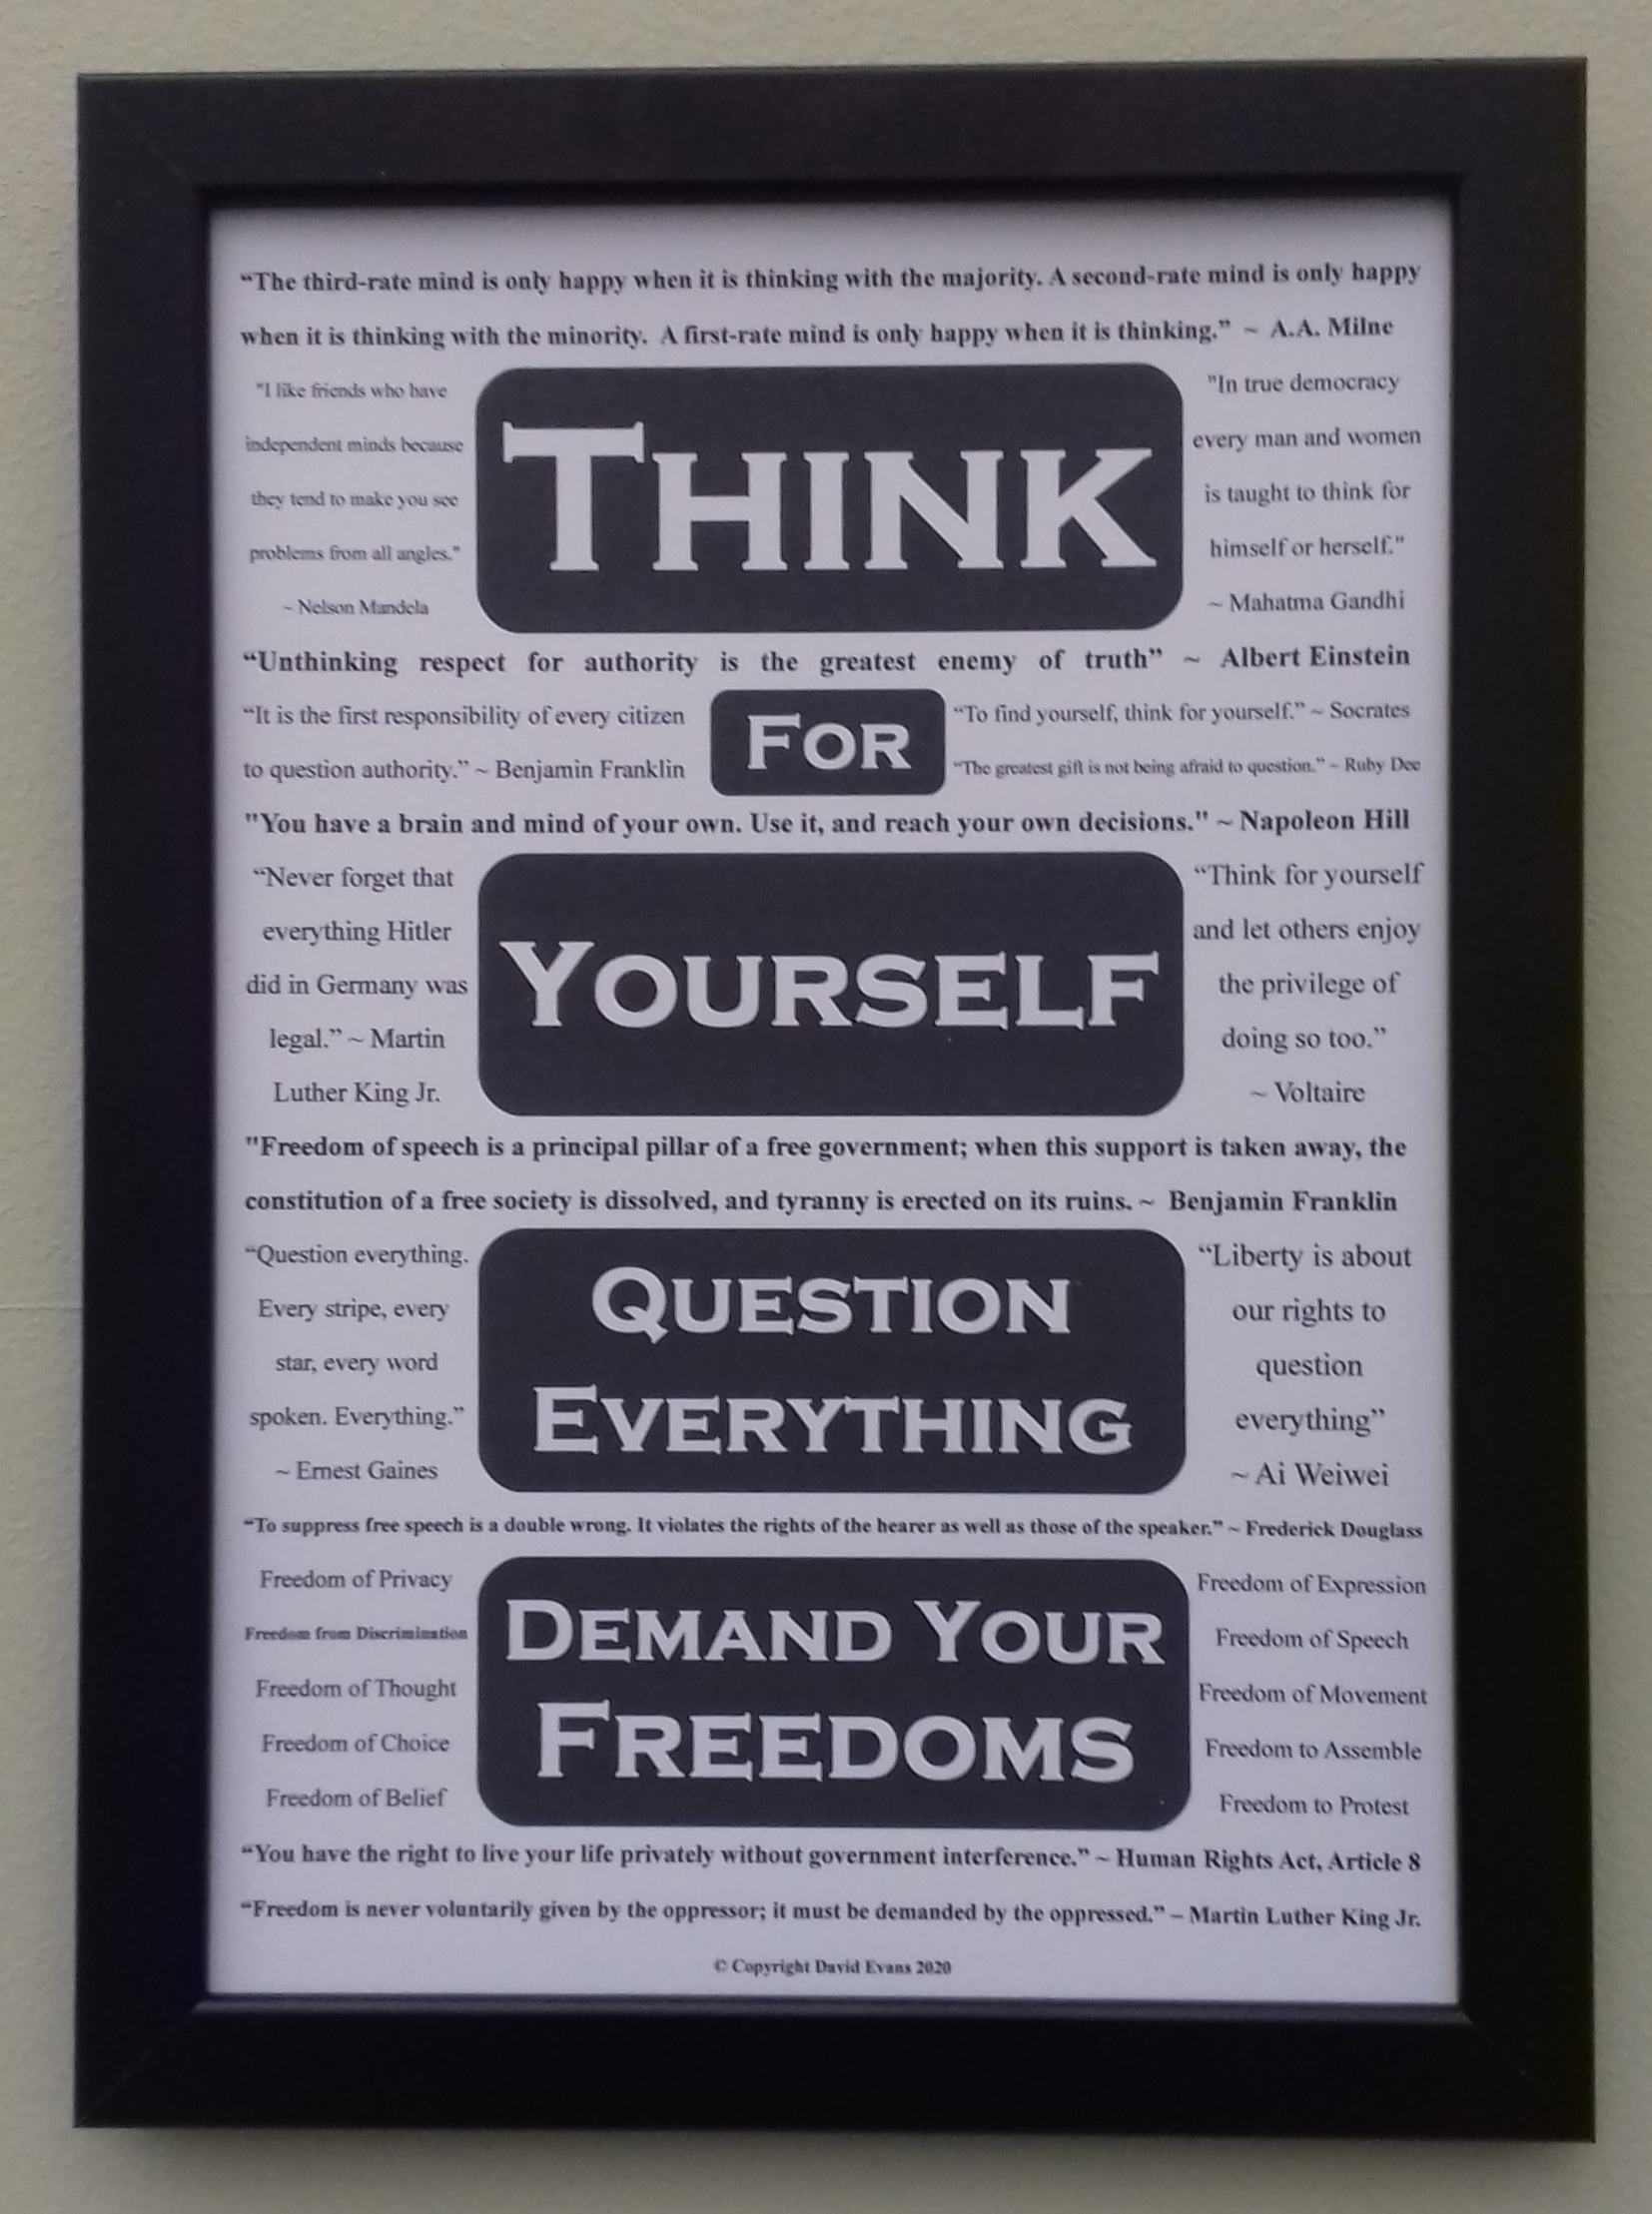 A thought provoking poster about our rights & freedoms - featuring 16 inspirational quotes